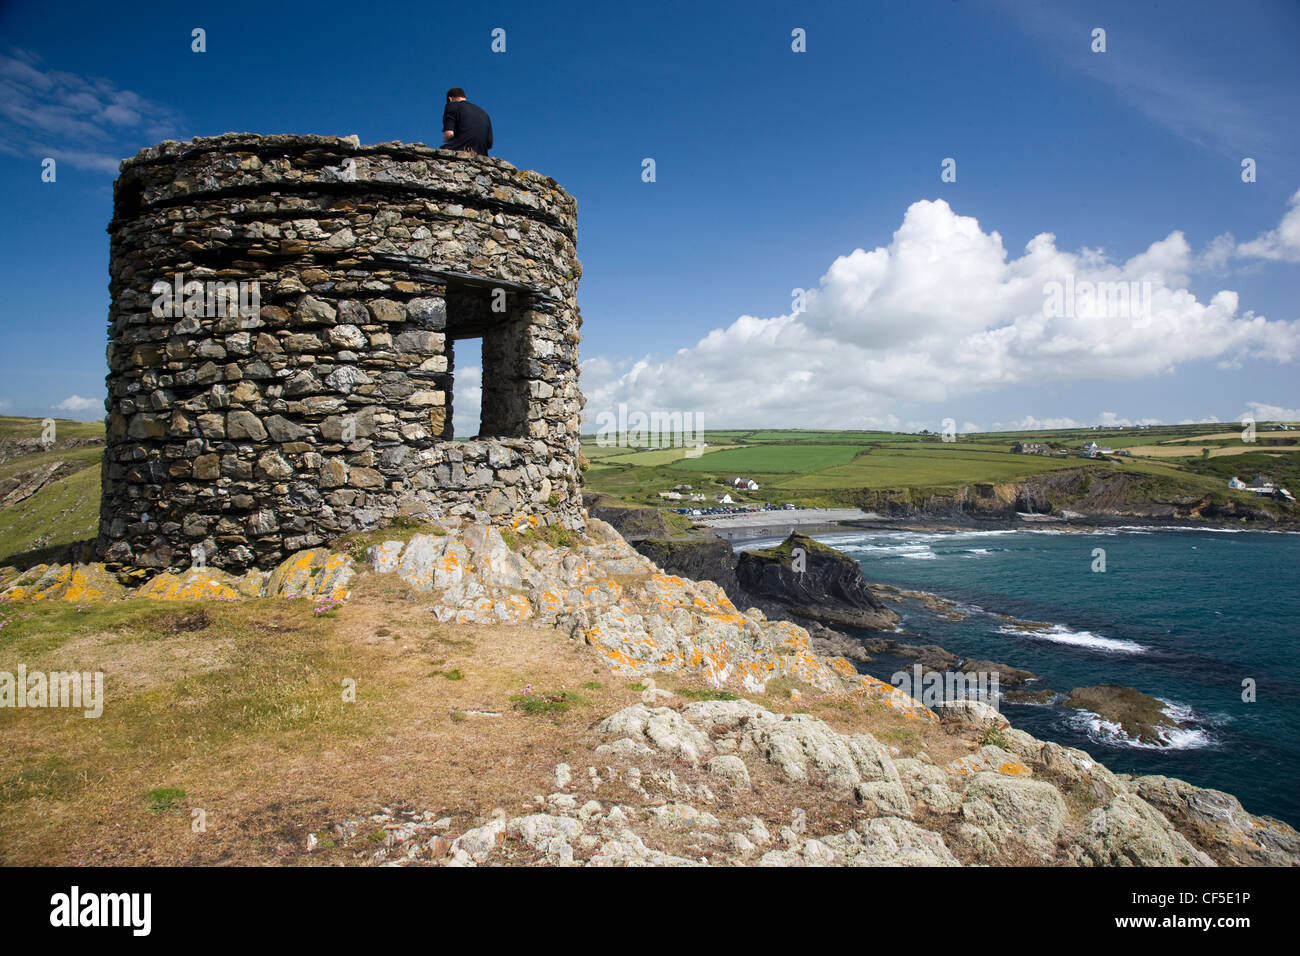 Abereiddy tower on Trwyncastell promontory fort in Pembrokeshire, Wales Stock Photo